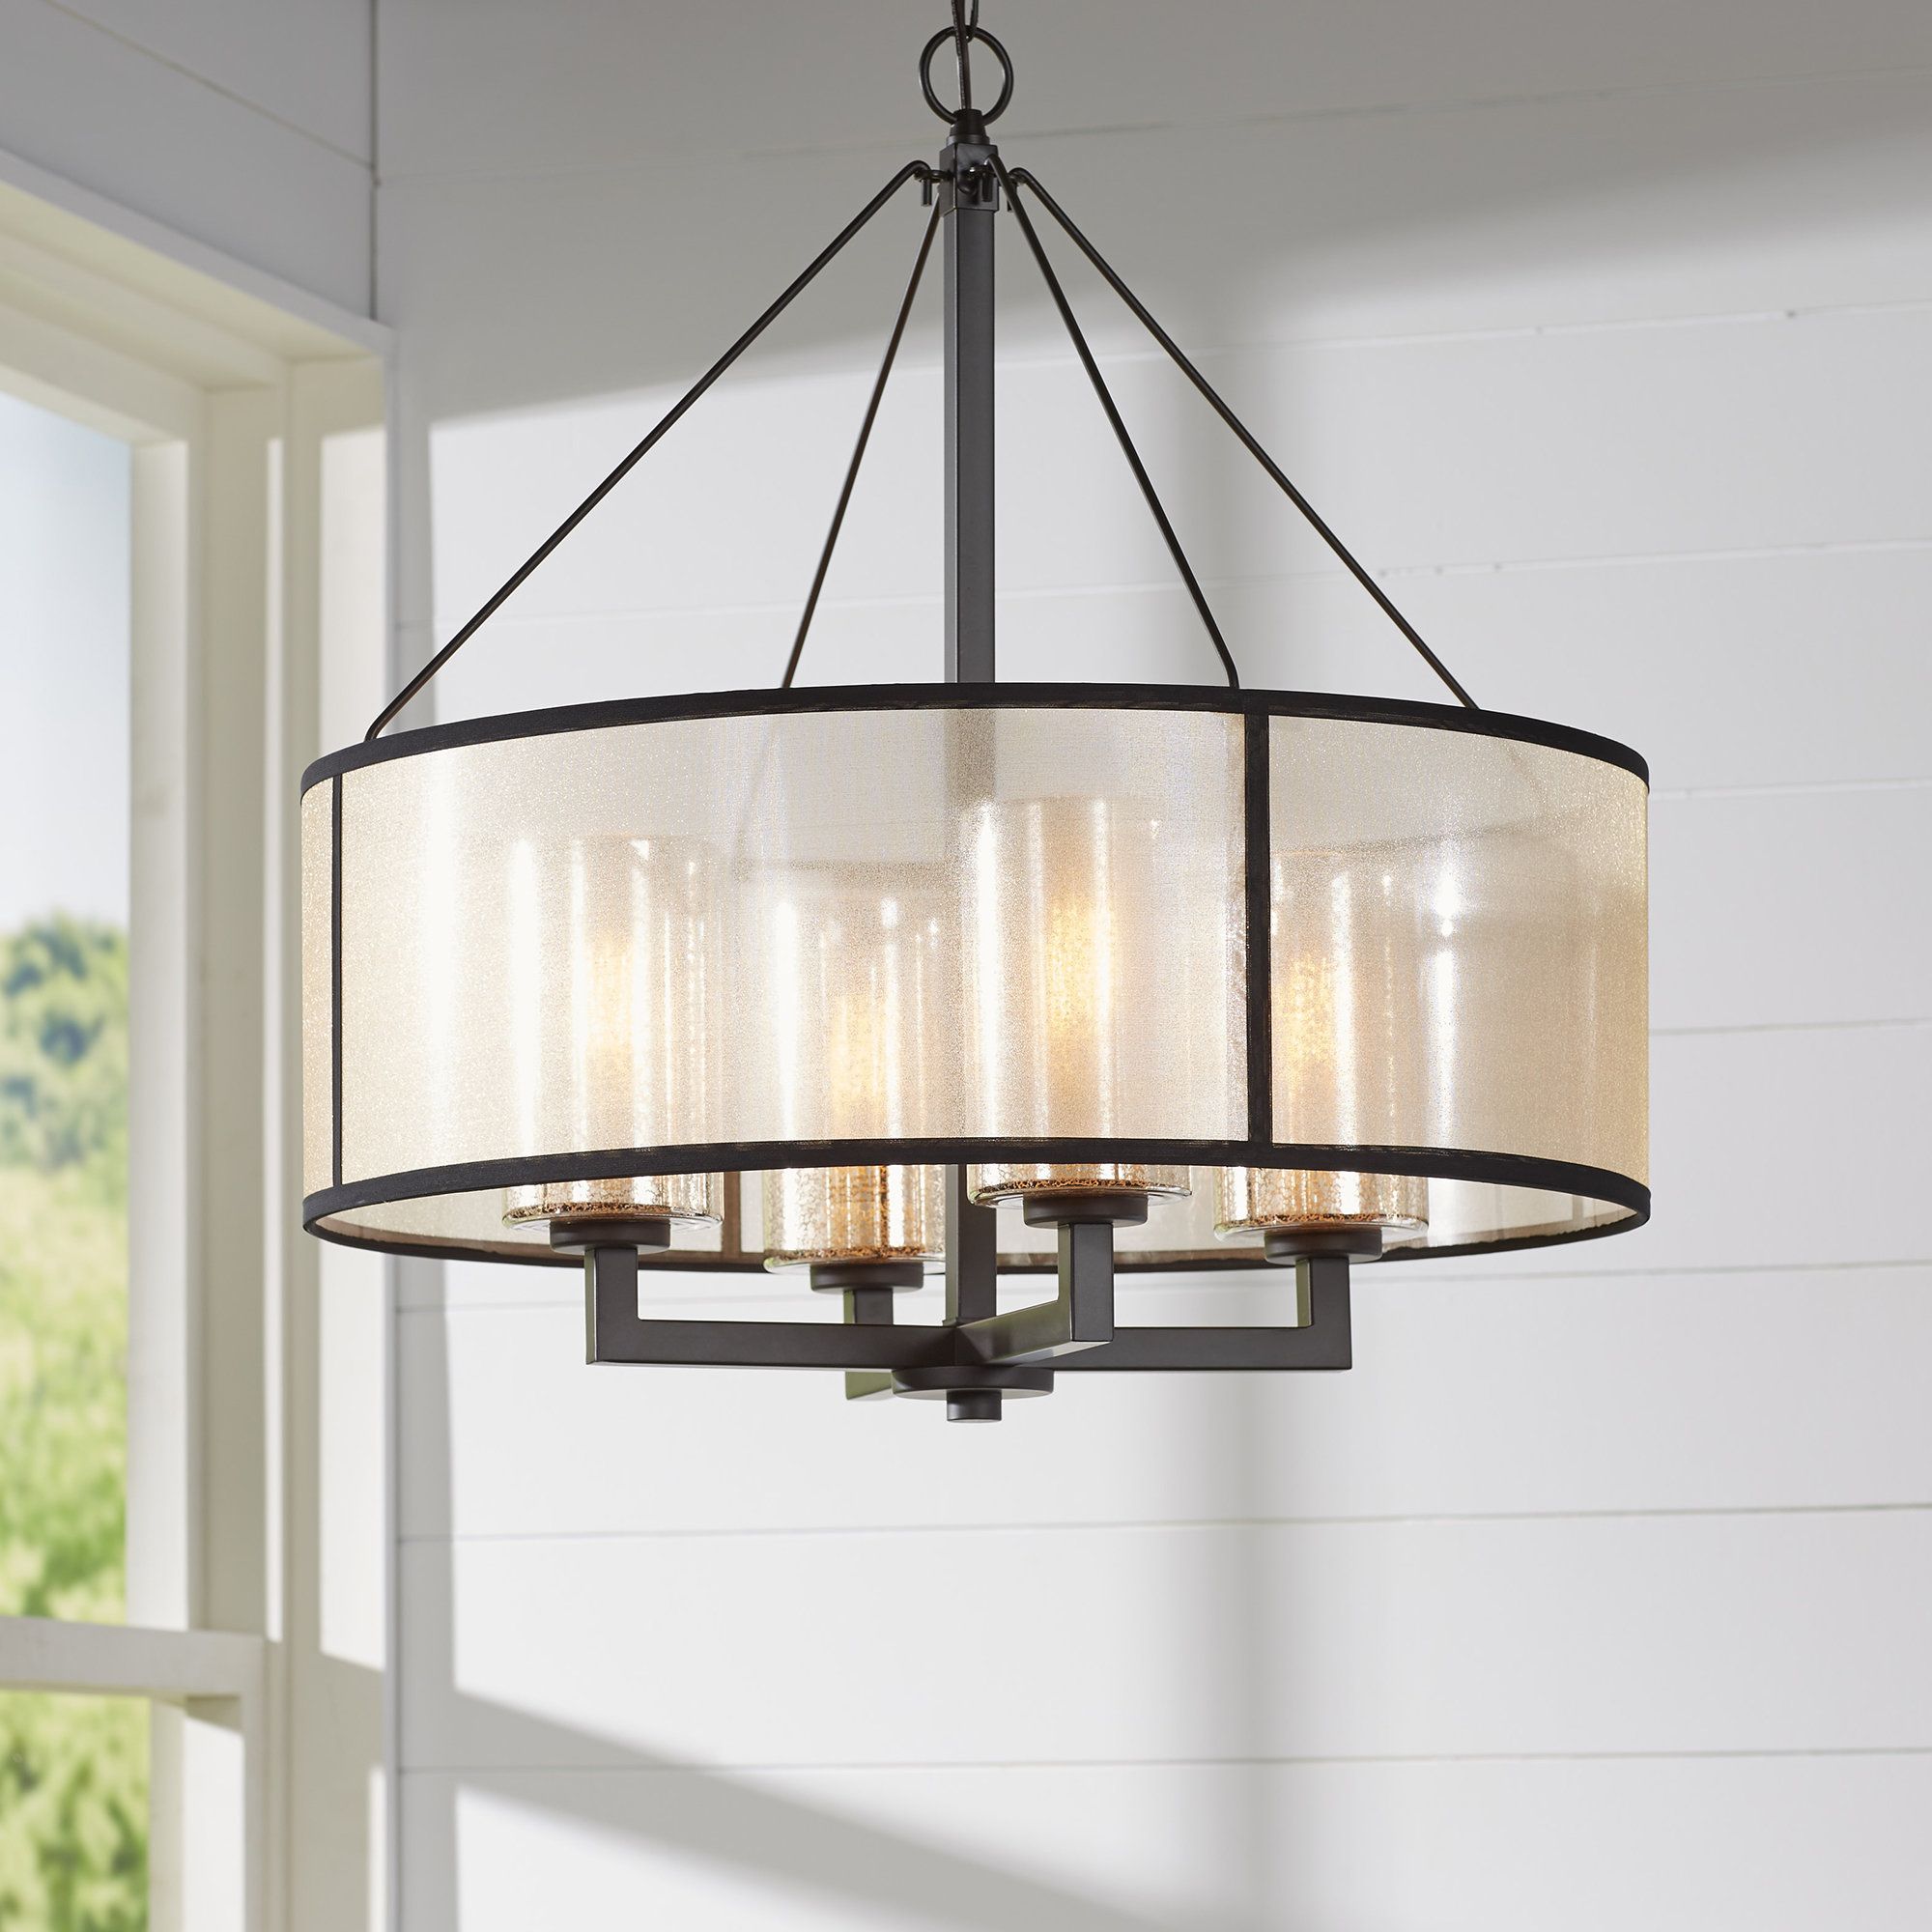 Dailey 4 Light Drum Chandelier Intended For Burton 5 Light Drum Chandeliers (View 16 of 30)